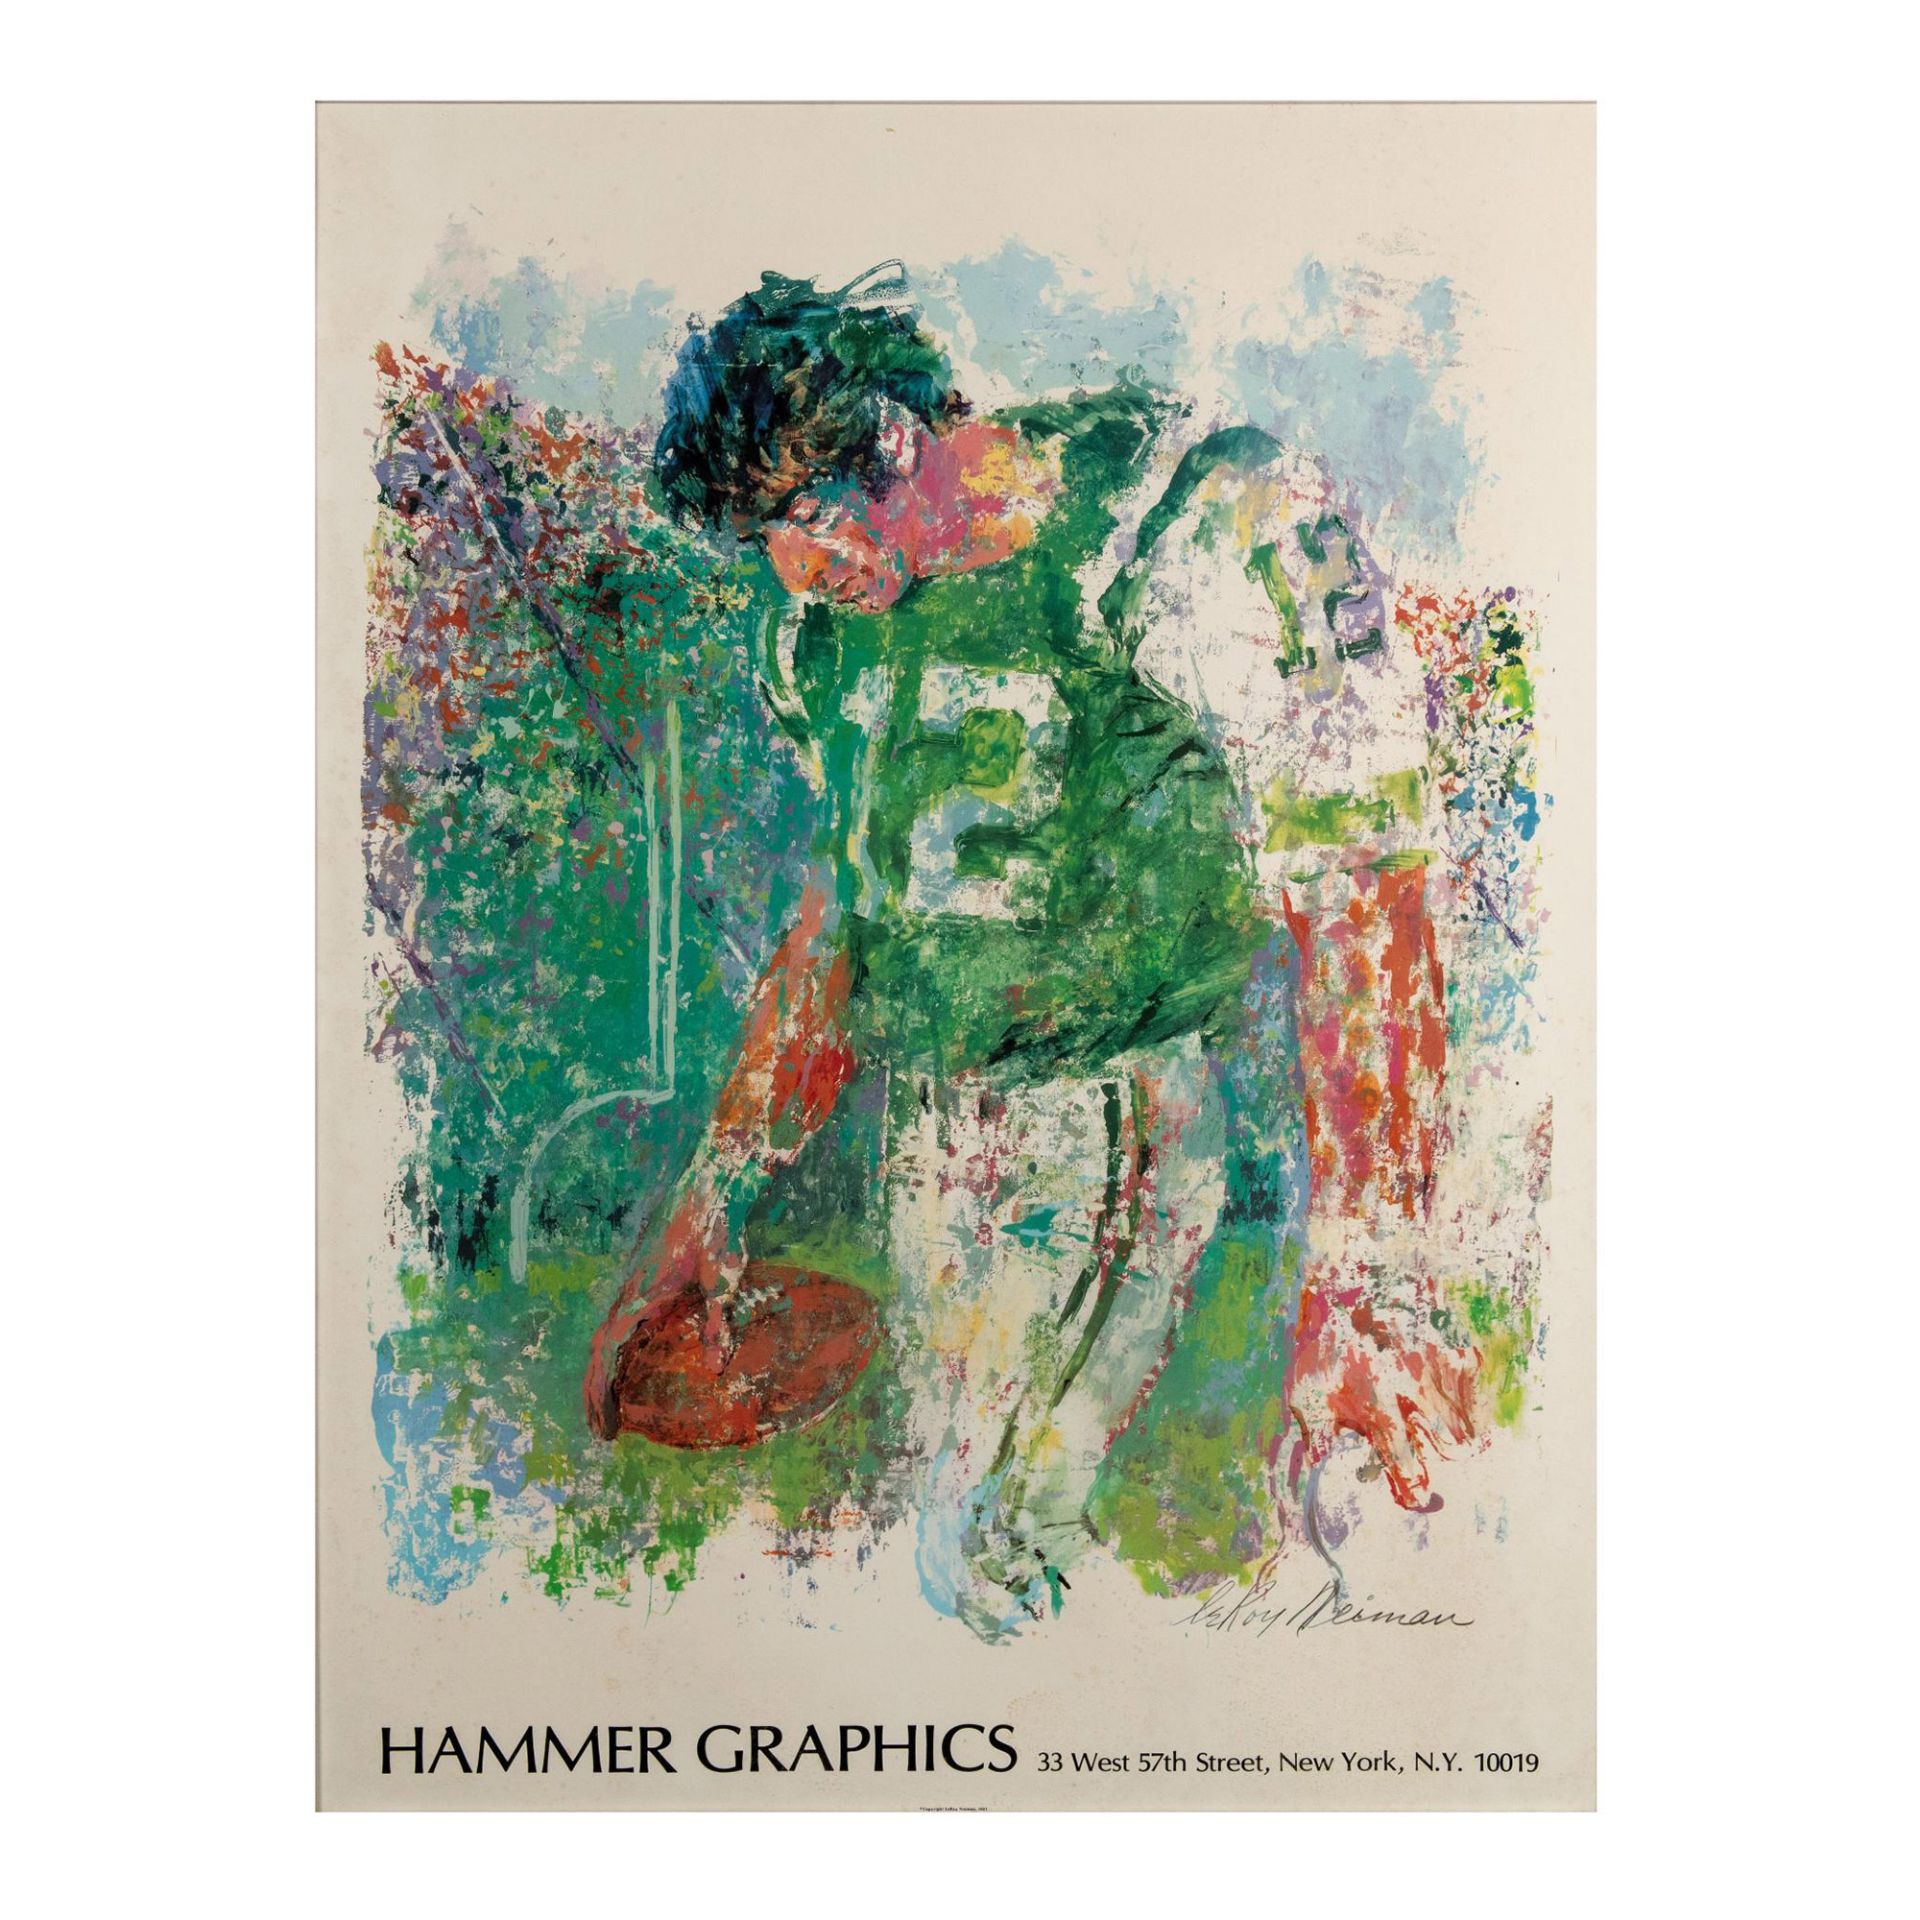 Leroy Neiman, Large Poster on Paper, Miami Superbowl 1969 - Image 2 of 5